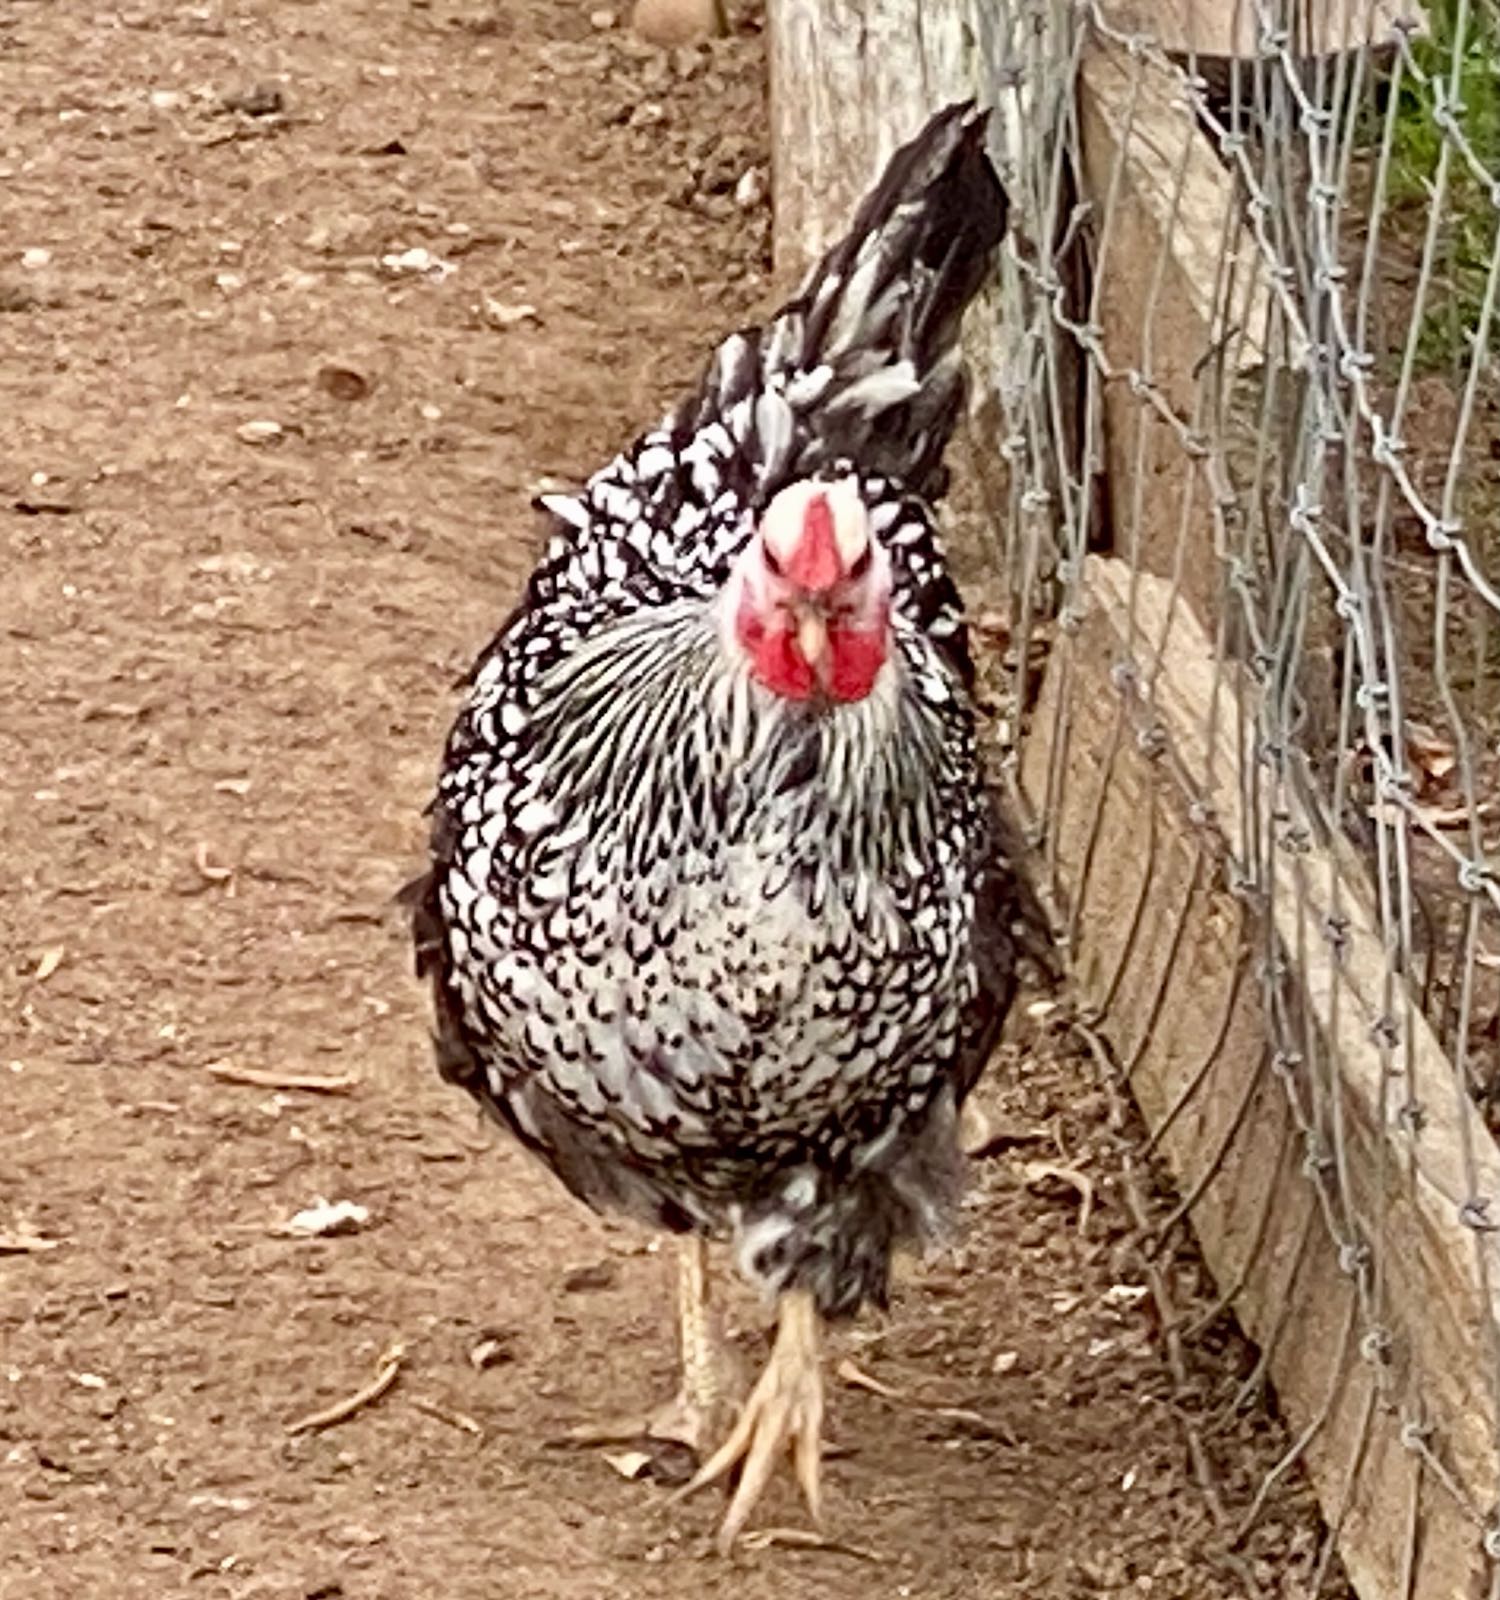 It's the weekend! Number 318, Plymouth Rock Chicken in the Farmyard